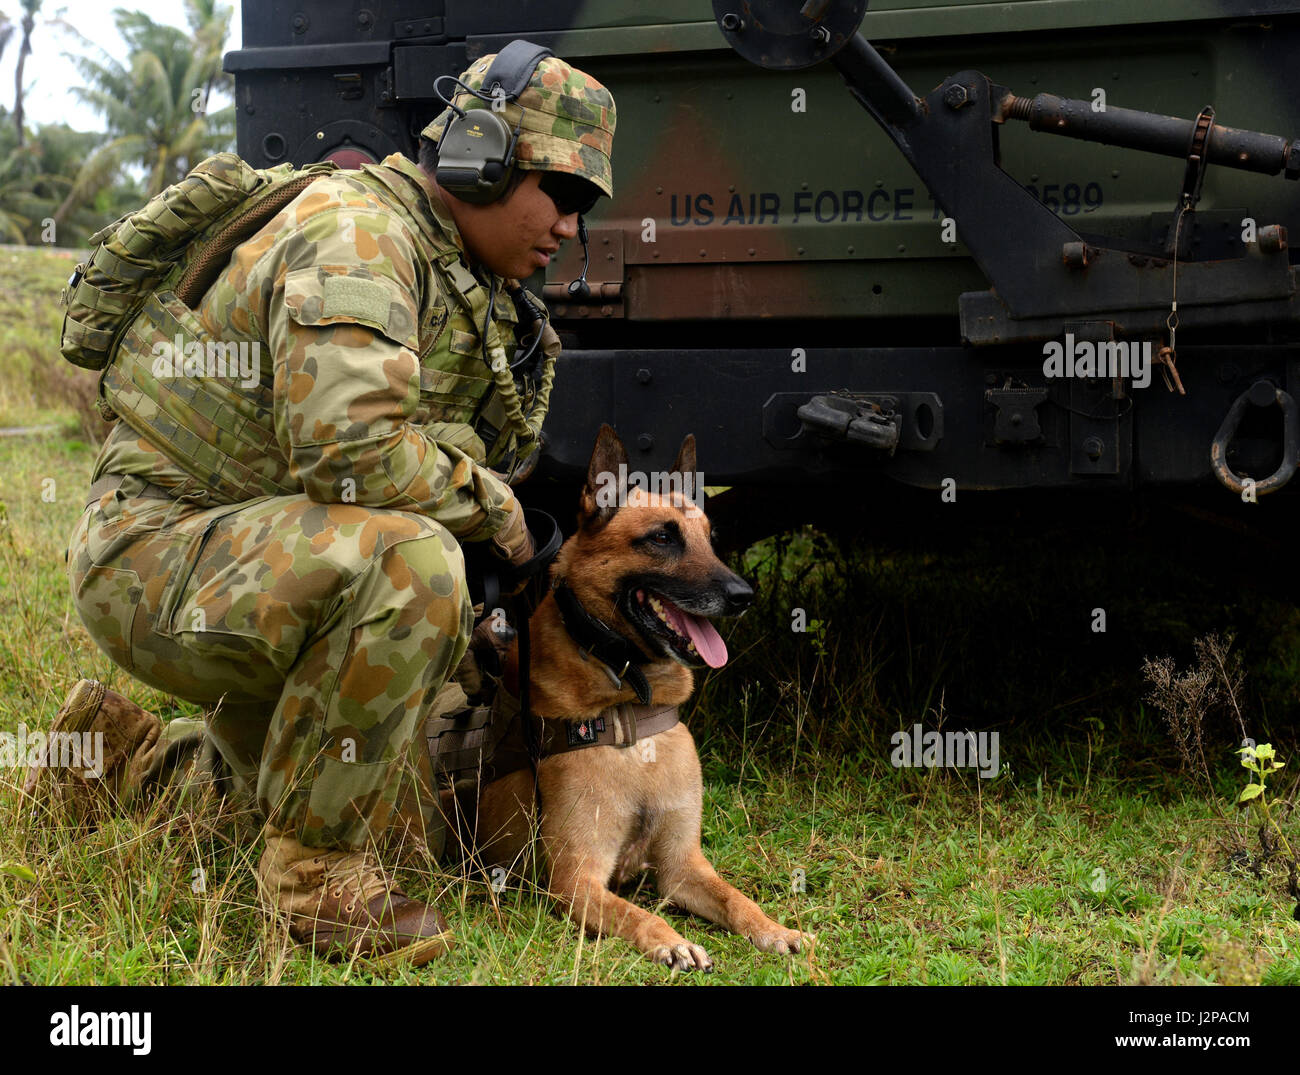 A Royal Australian Air Force dog handler works with his dog during a COPE NORTH exercise Feb. 13, 2017, at Andersen Air Force Base, Guam. This exercise helps cultivate common bonds and foster good will between U.S. and the international community through training. (U.S. Air Force photo by Airman 1st Class Gerald R. Willis) Stock Photo